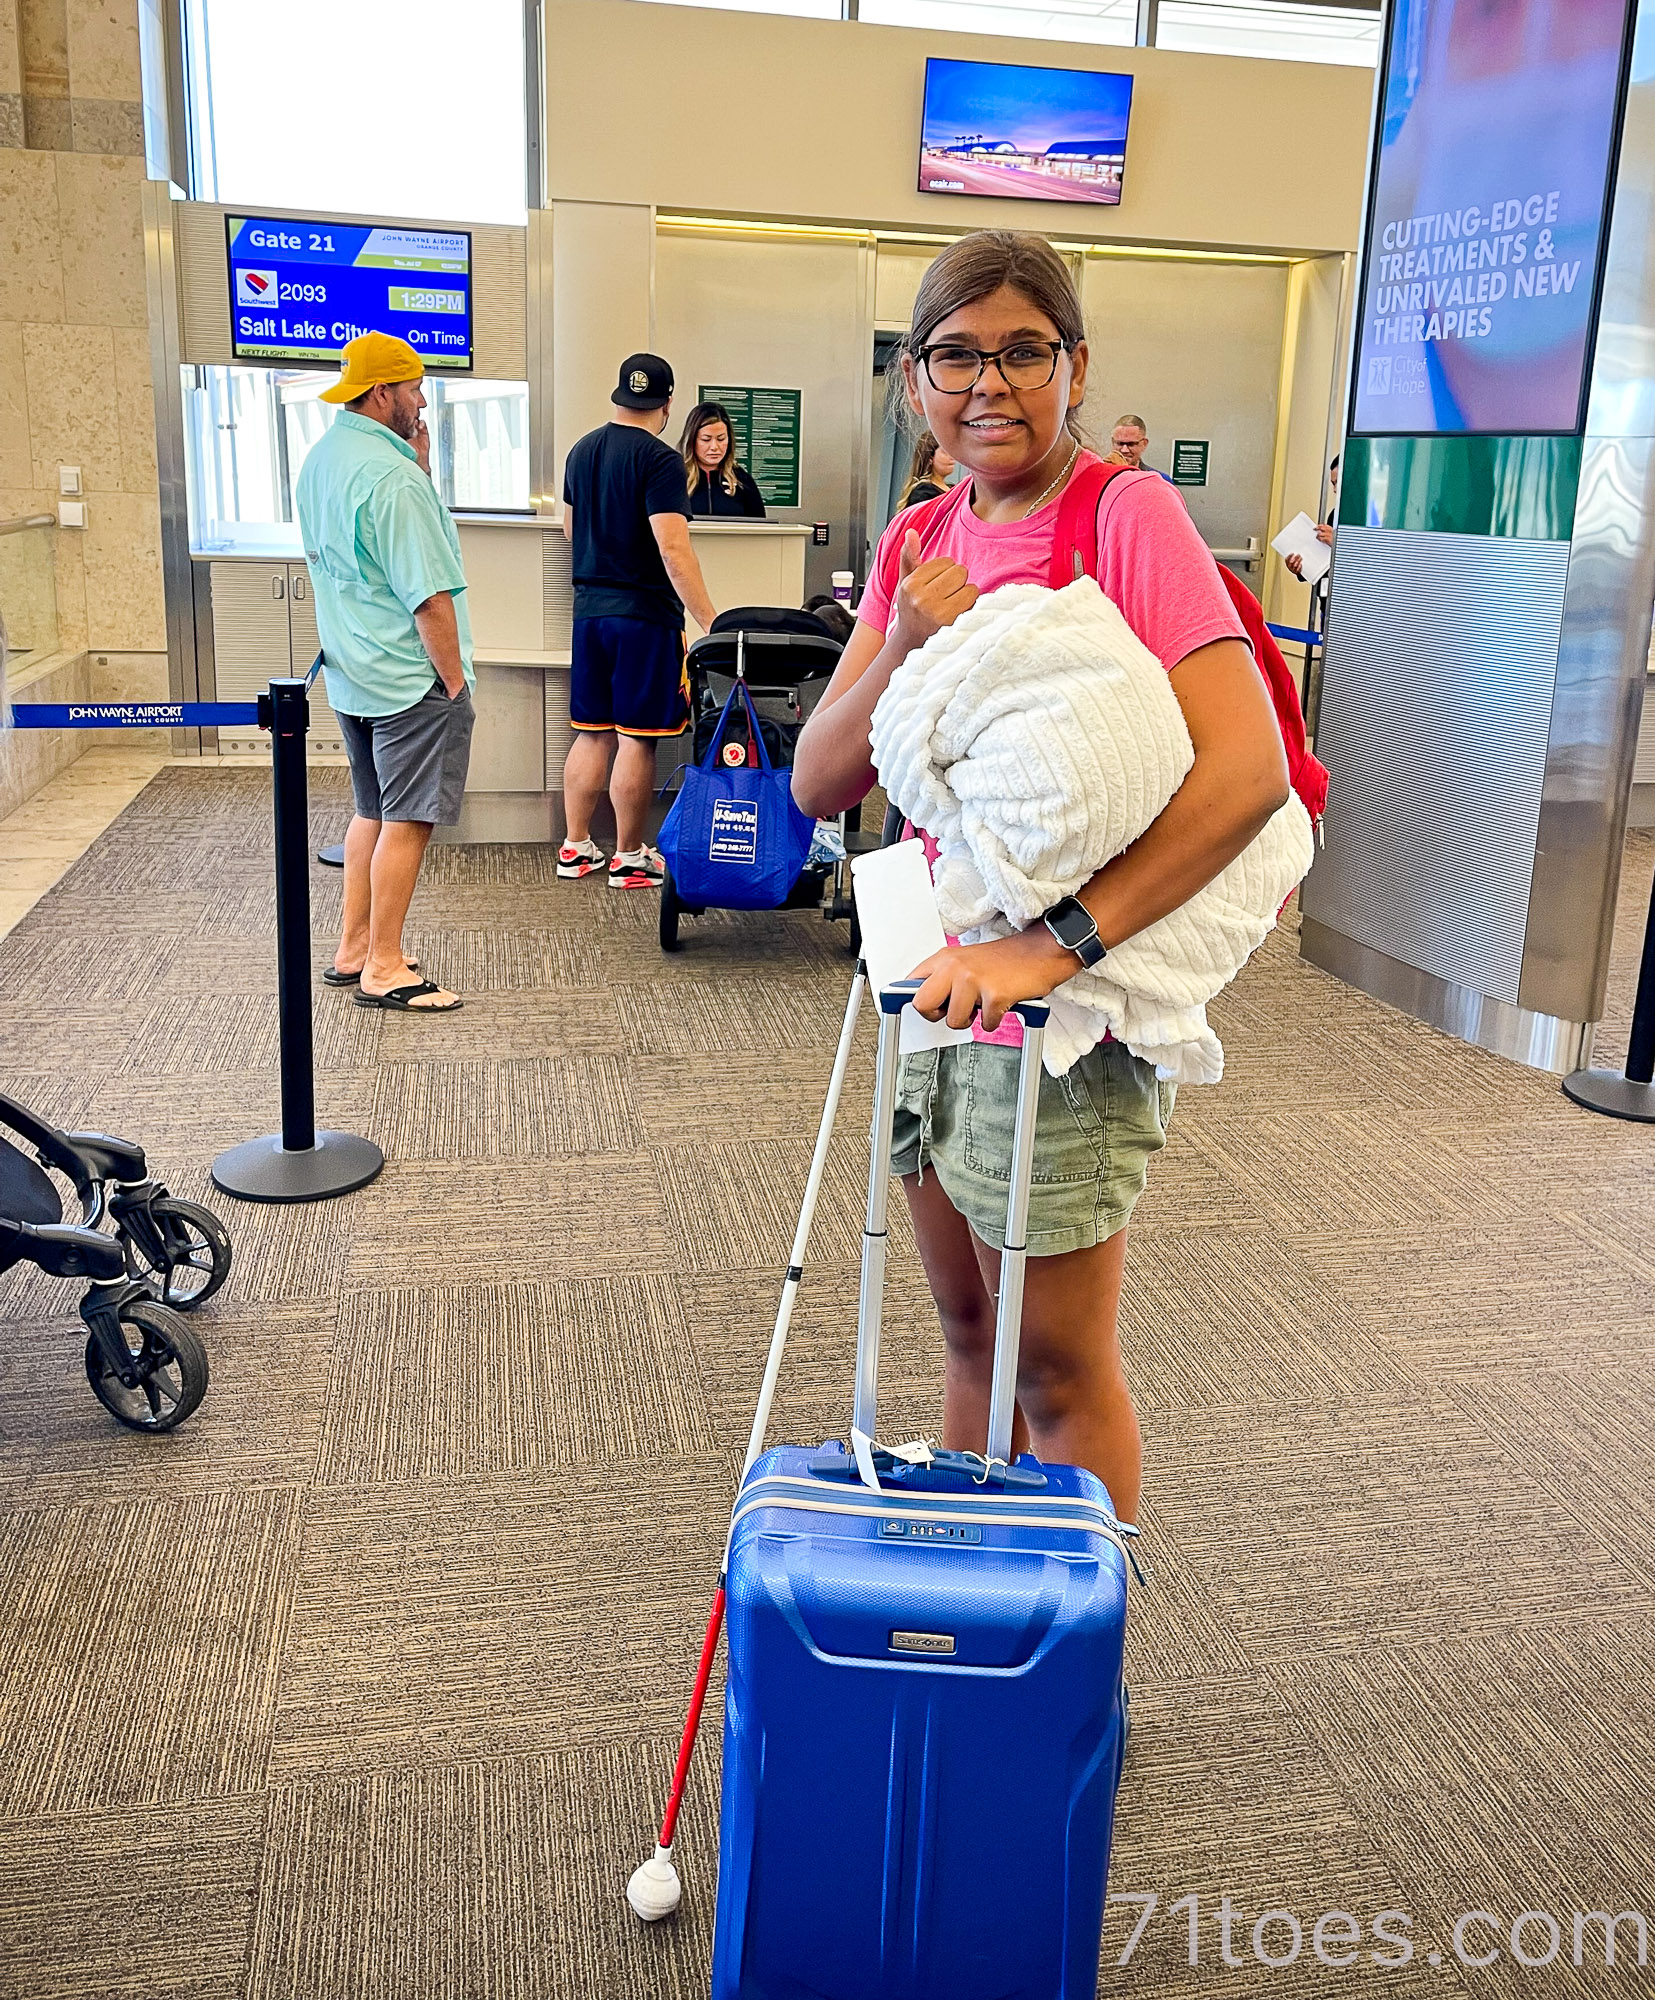 Lucy heading on a flight by herself, helping her with summer goals to gain independence